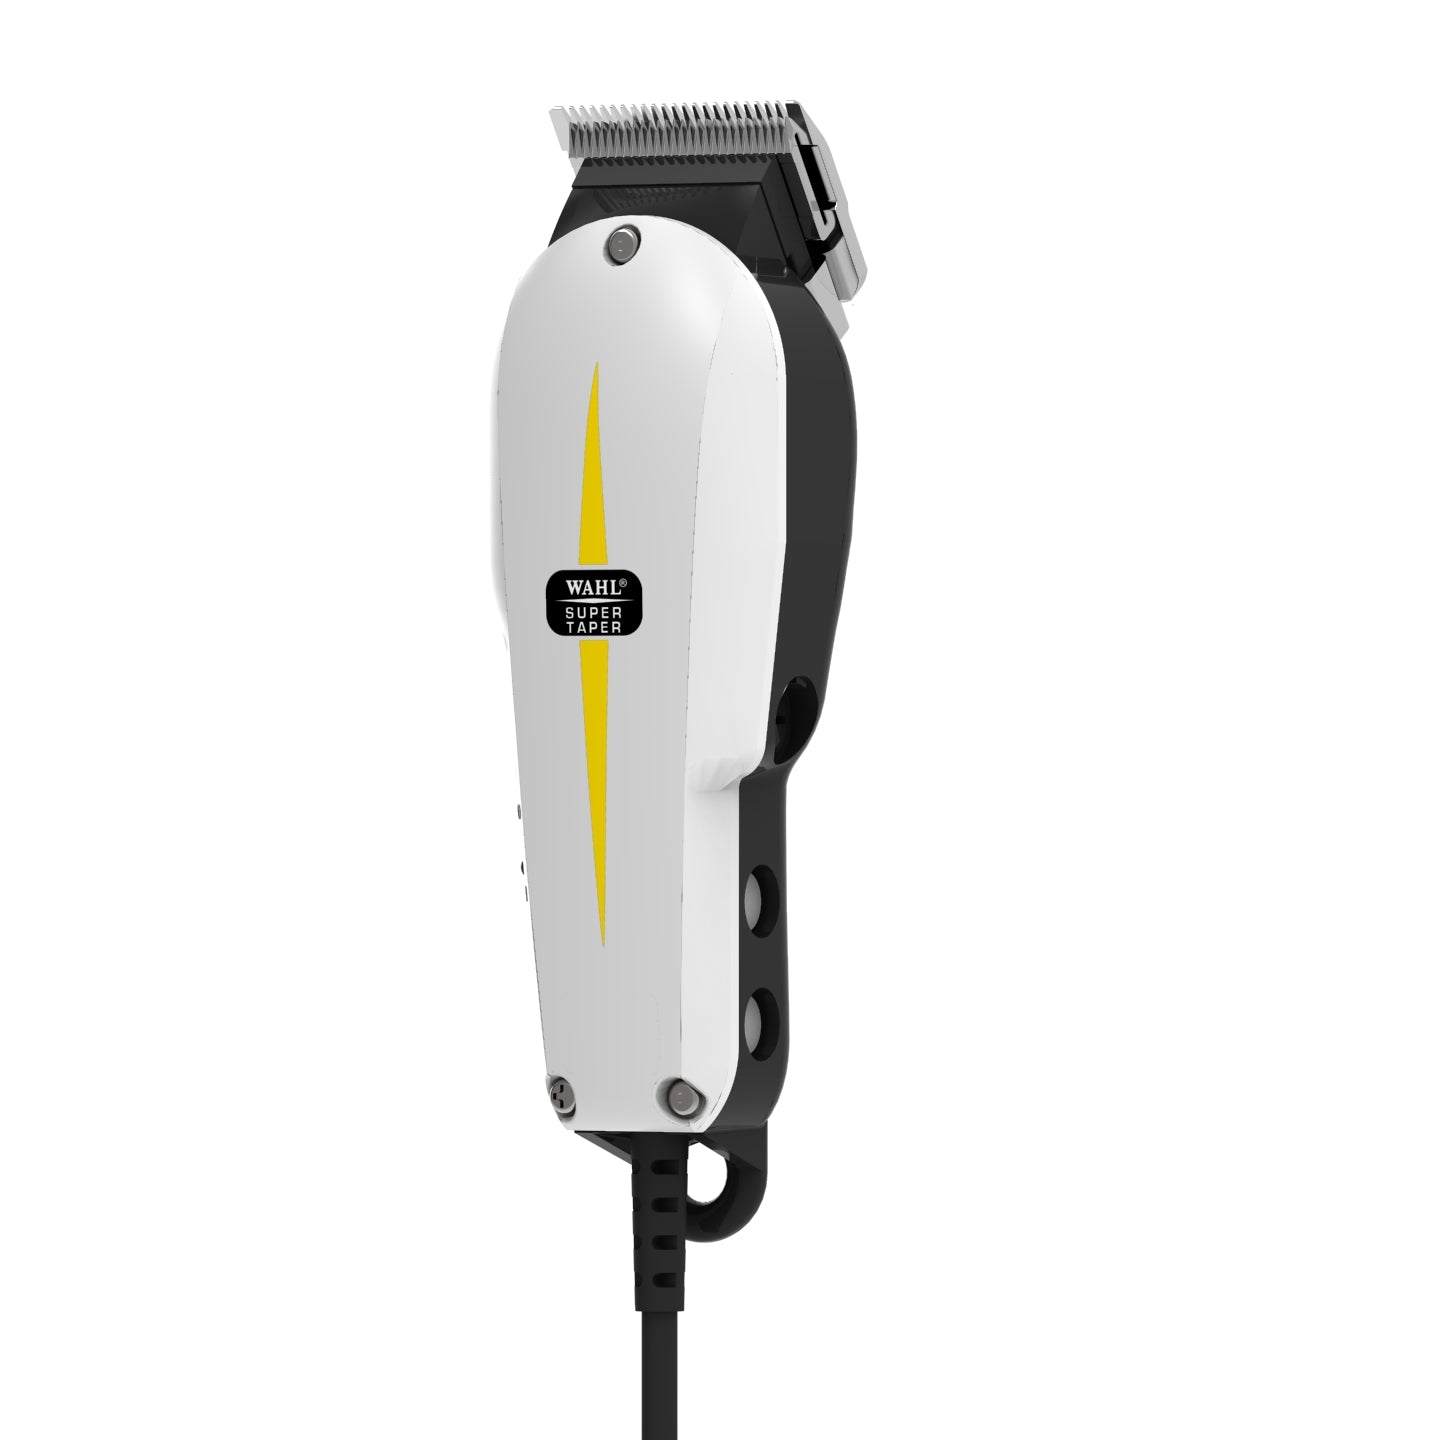 WAHL Super Taper Hair Clippers